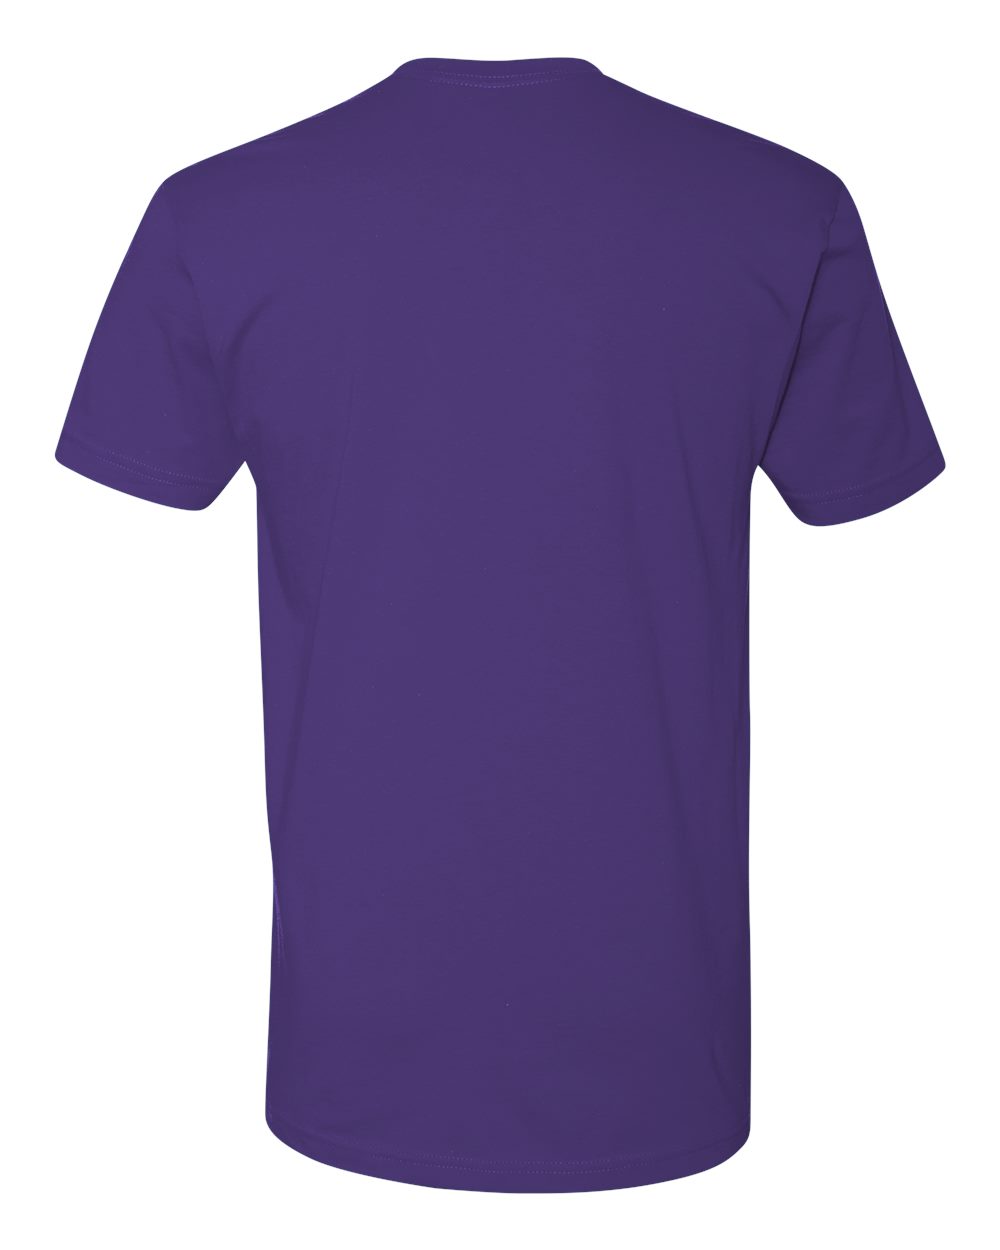 Back of Purple T Shirt from Nudge Printing